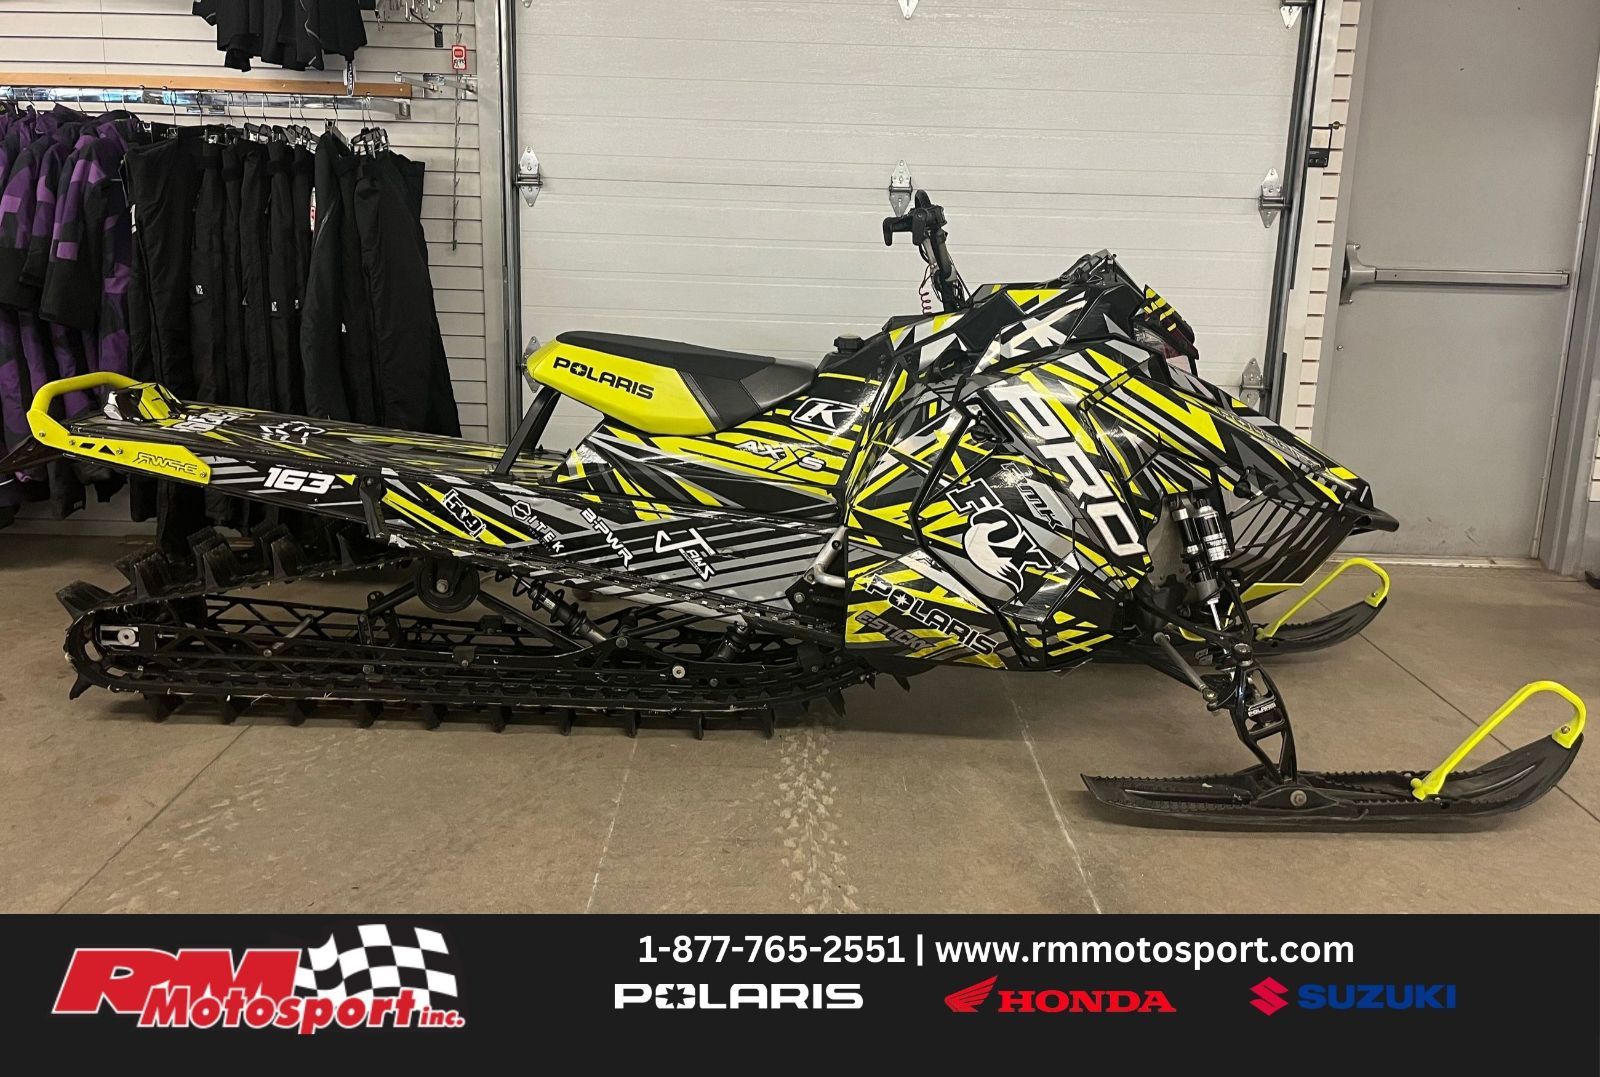 RM Motosport | Snowmobile Polaris in our Complete inventory in 